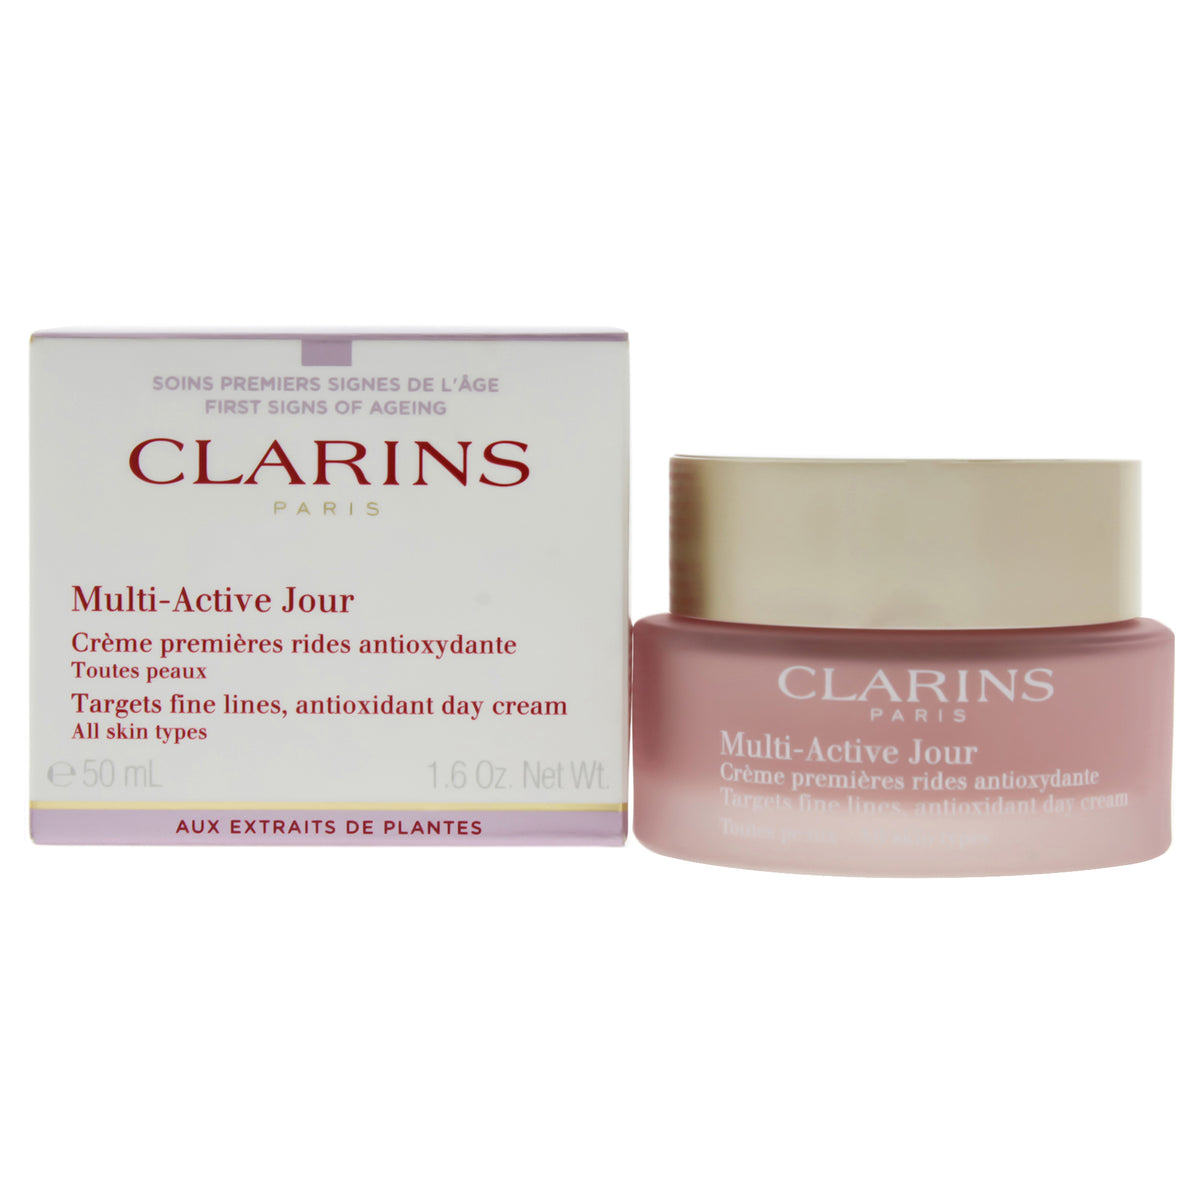 Multi-Active Day Cream - All Skin Types by Clarins for Women - 1.6 oz Cream